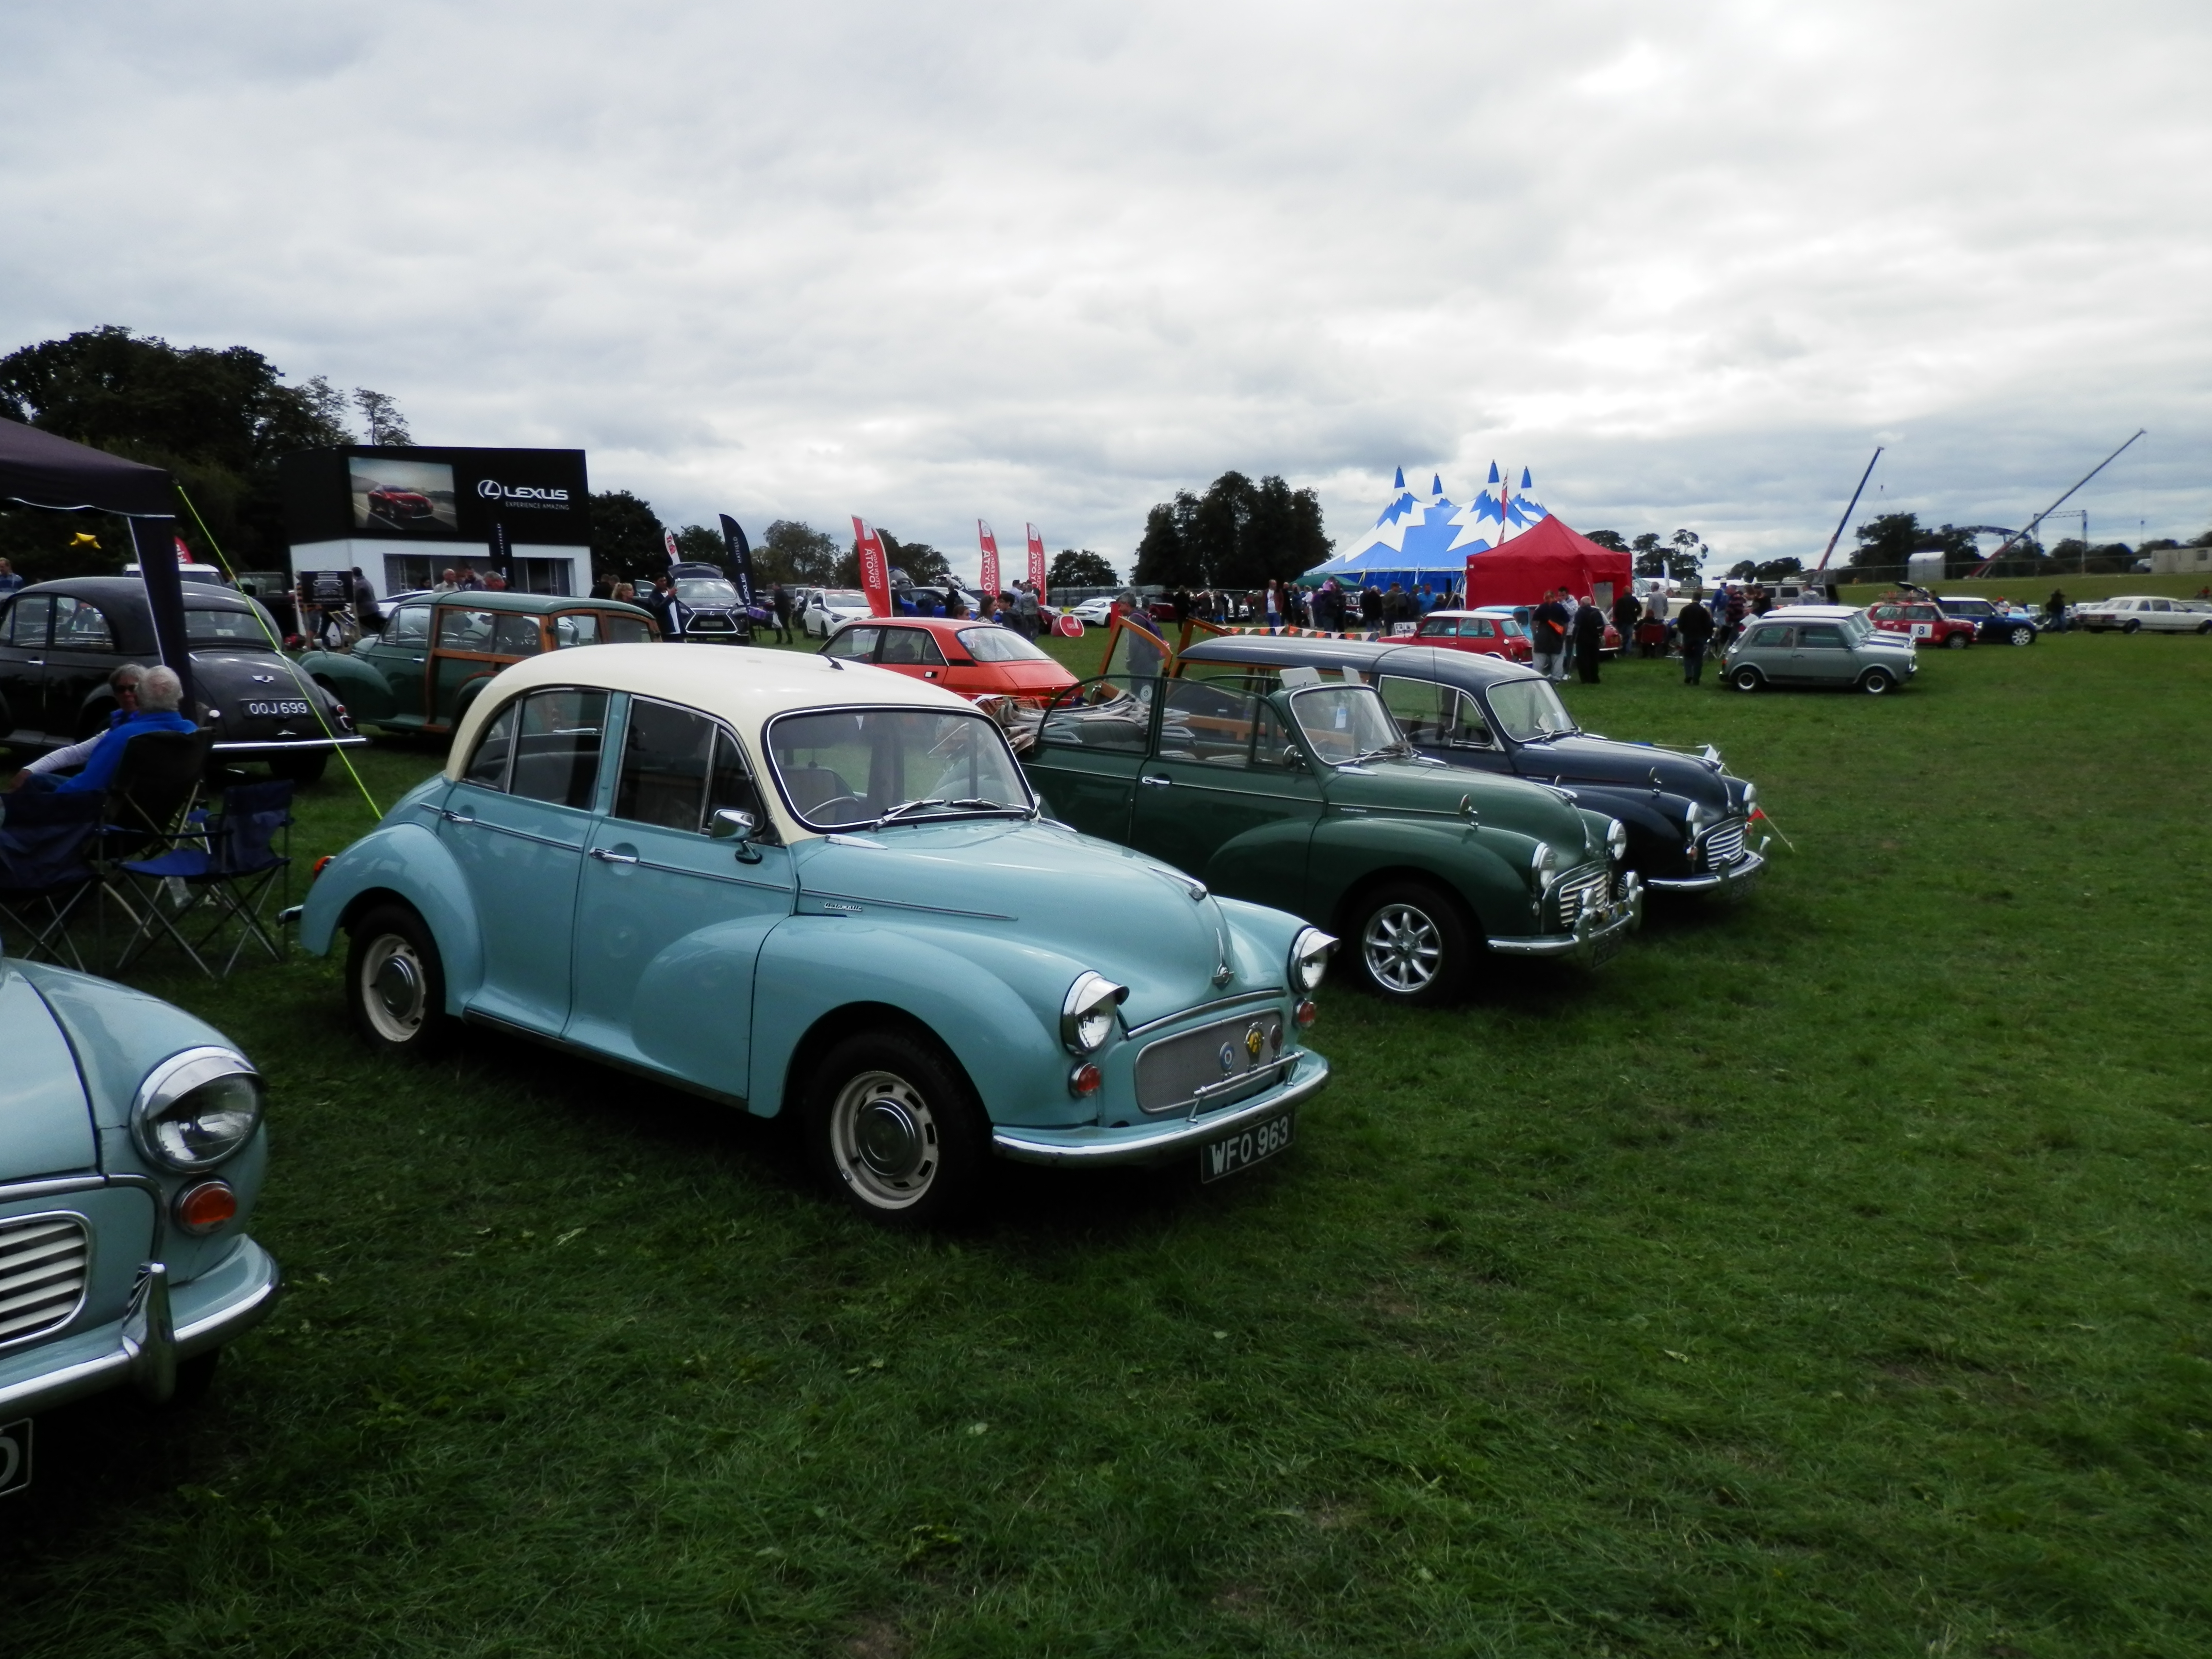 Knebworth Classic Car Show - 27 August 2018